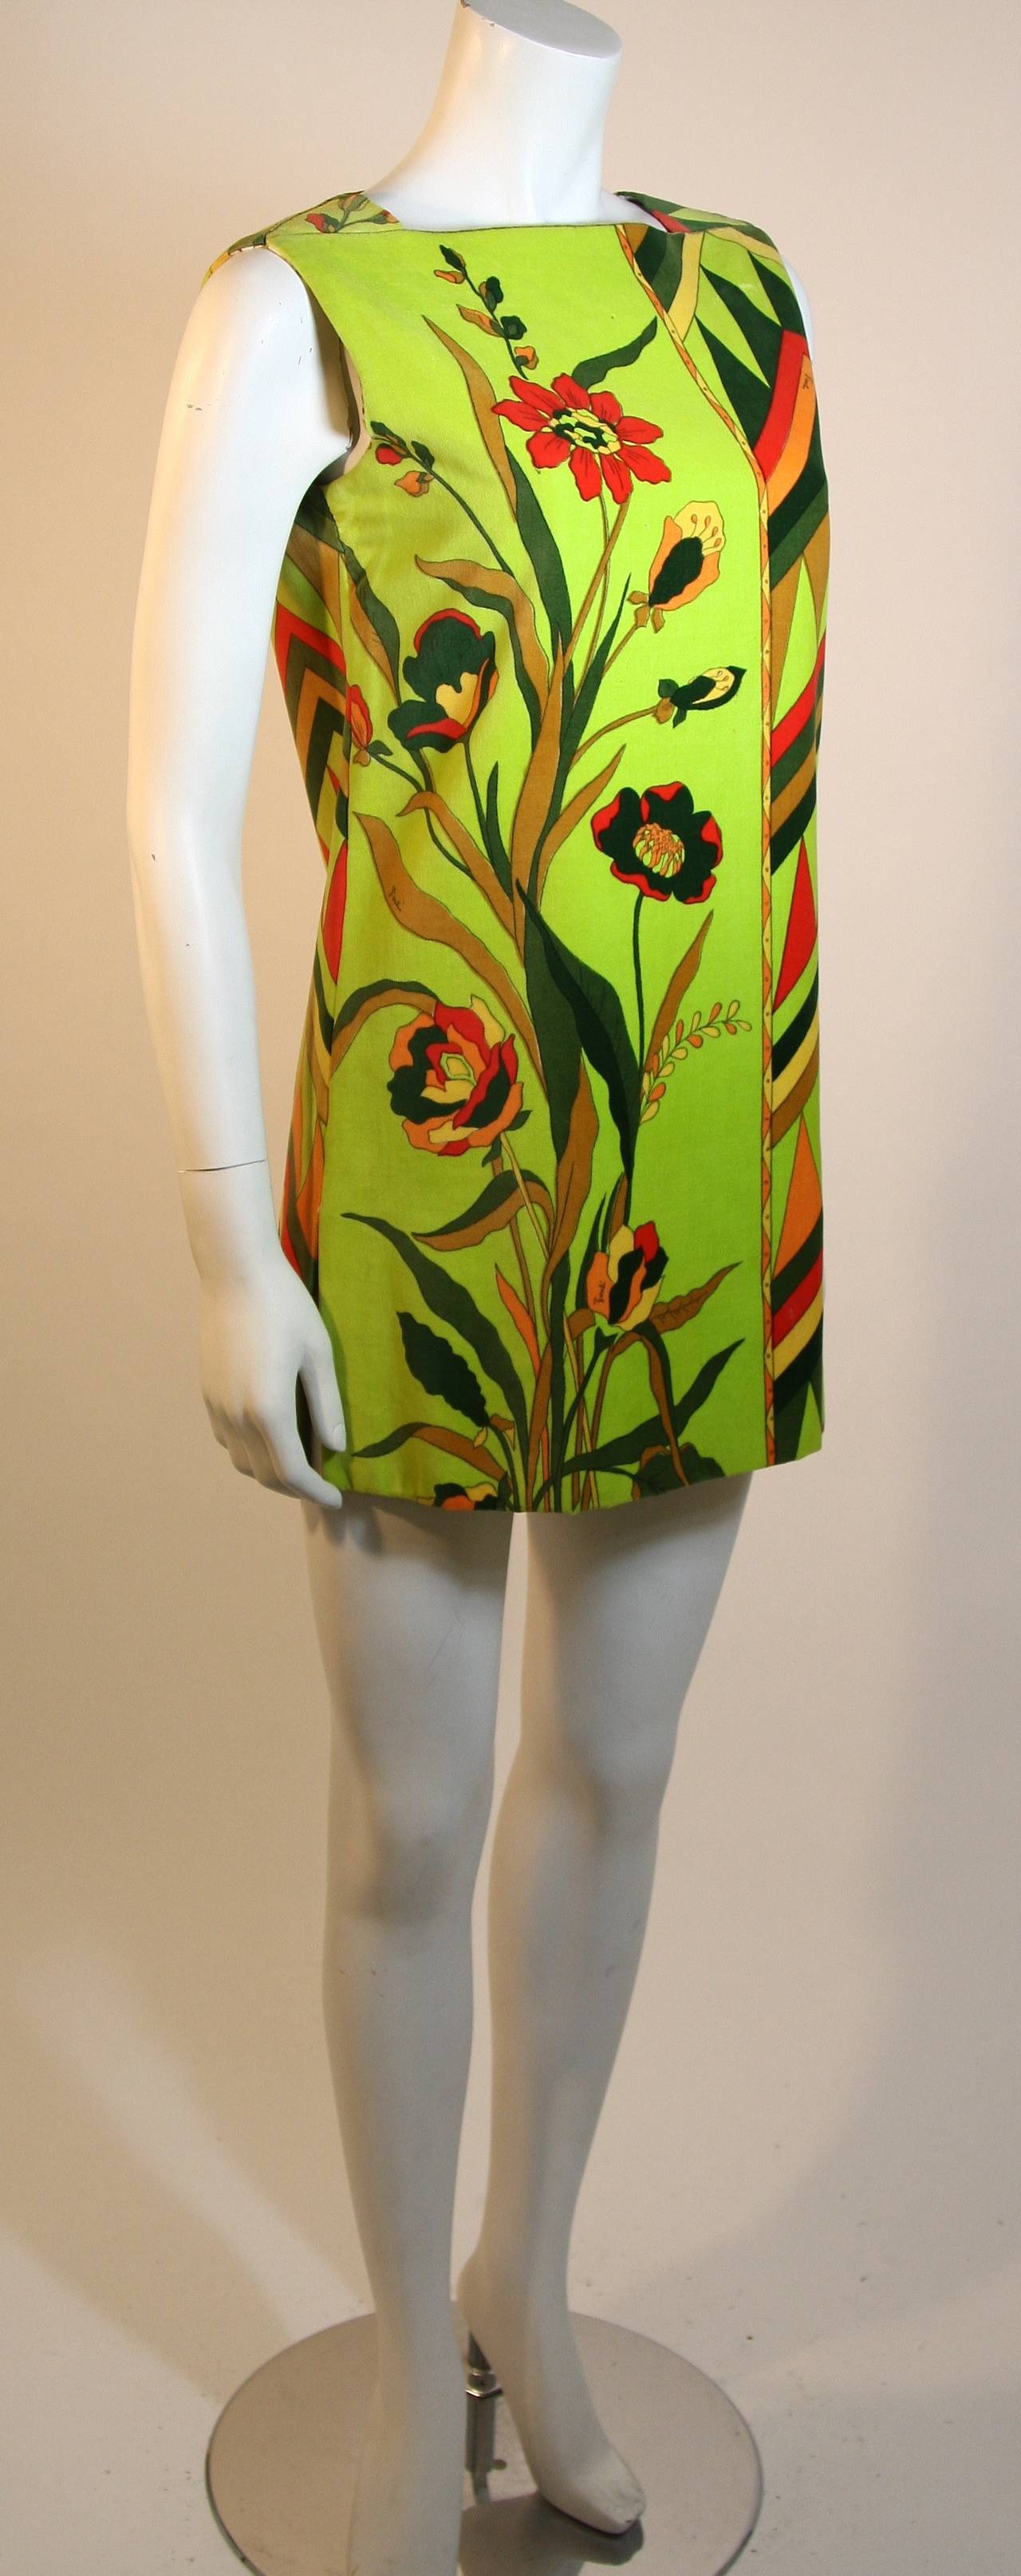 This is an Emilio Pucci design. This wonderful shift dress is composed of a multi-colored velvet with a floral design/artwork. It is a pull-over style dress. Made in Italy.

Measures (Approximately)
Length: 30